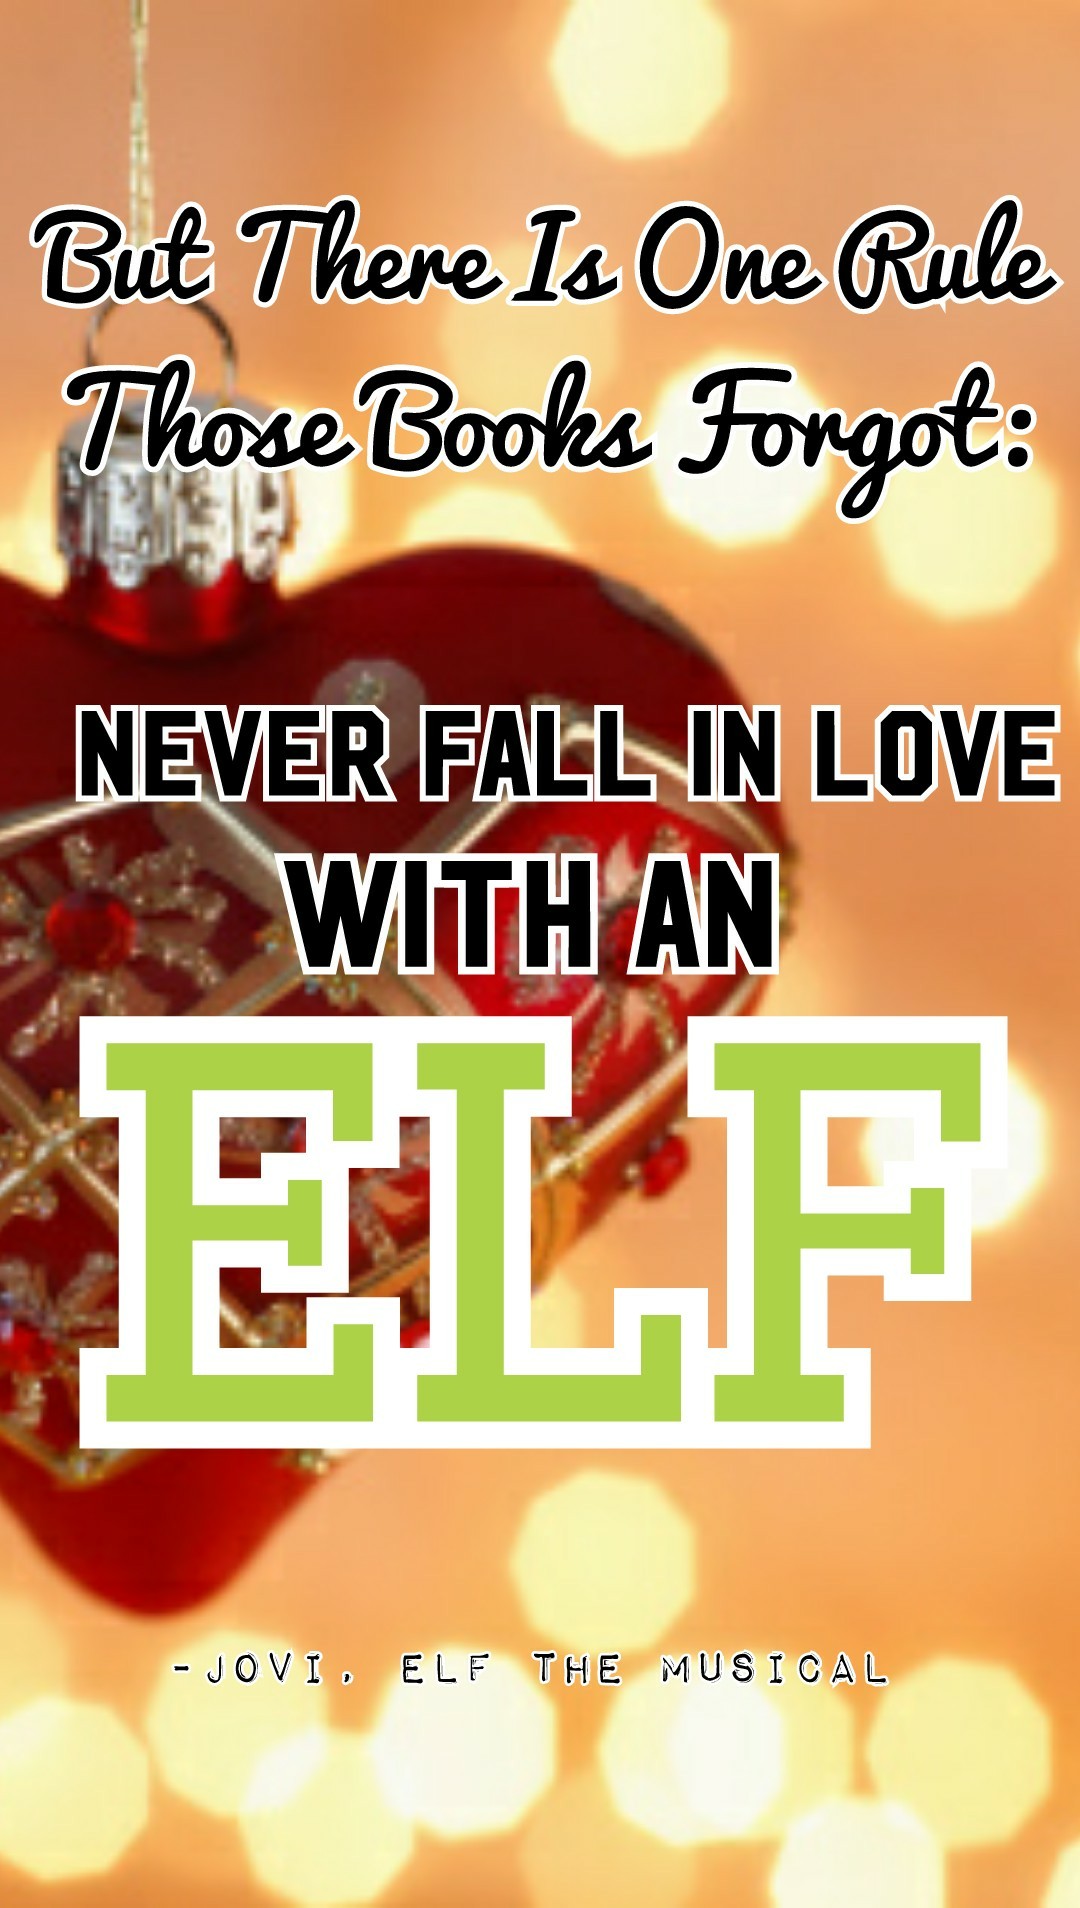 But there is one rule those books forgot, never fall in love with an elf! 💕🎄